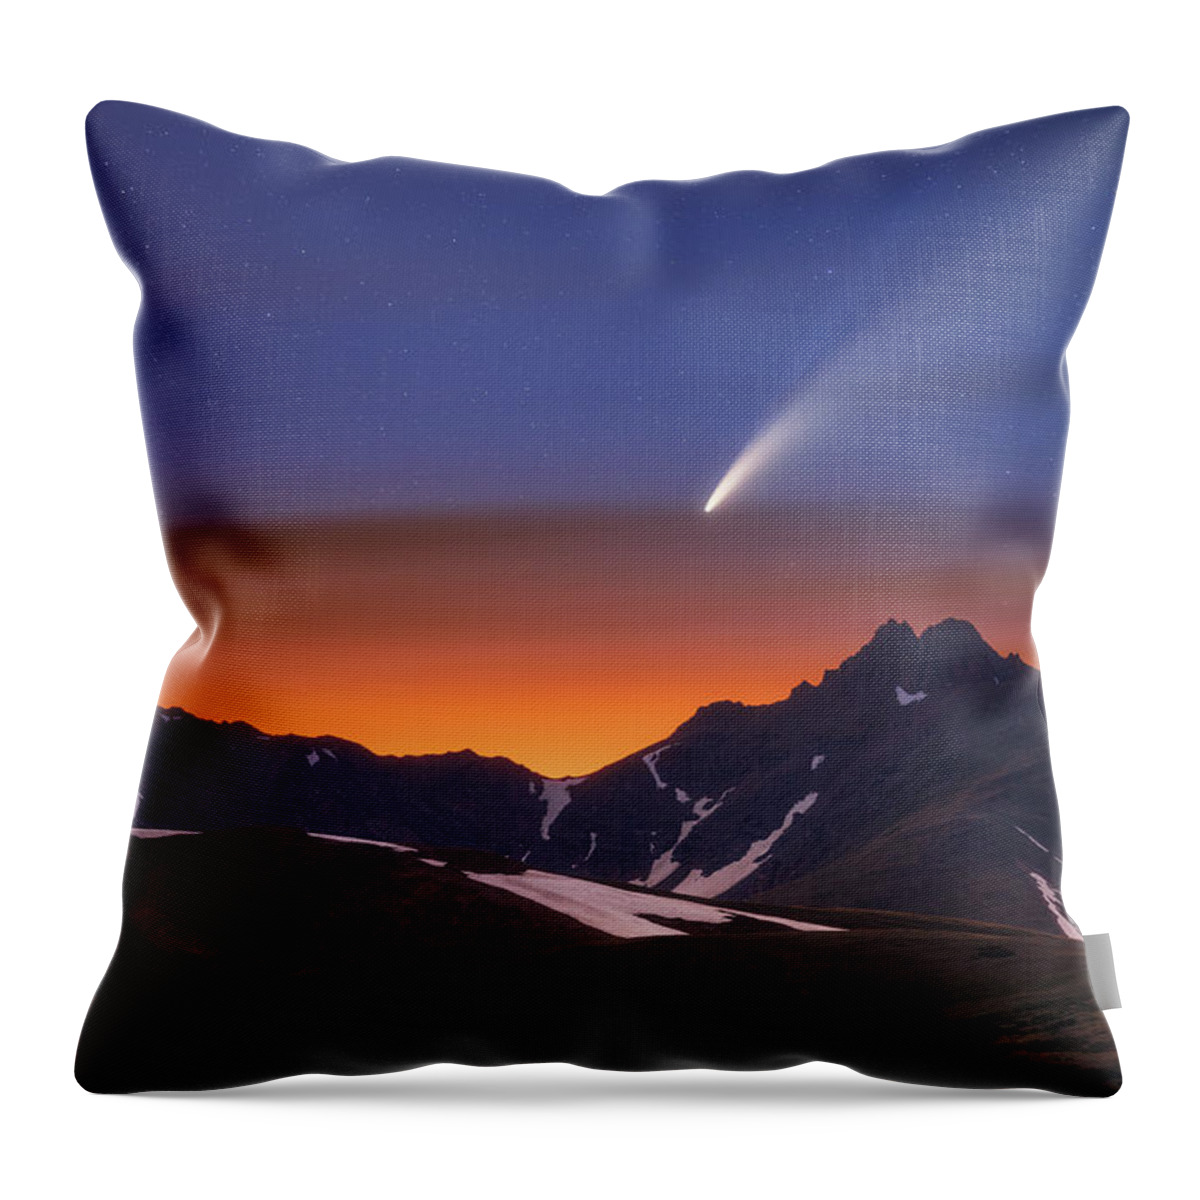 Comet Neowise Throw Pillow featuring the photograph Comet Neowise Over The Citadel by Darren White